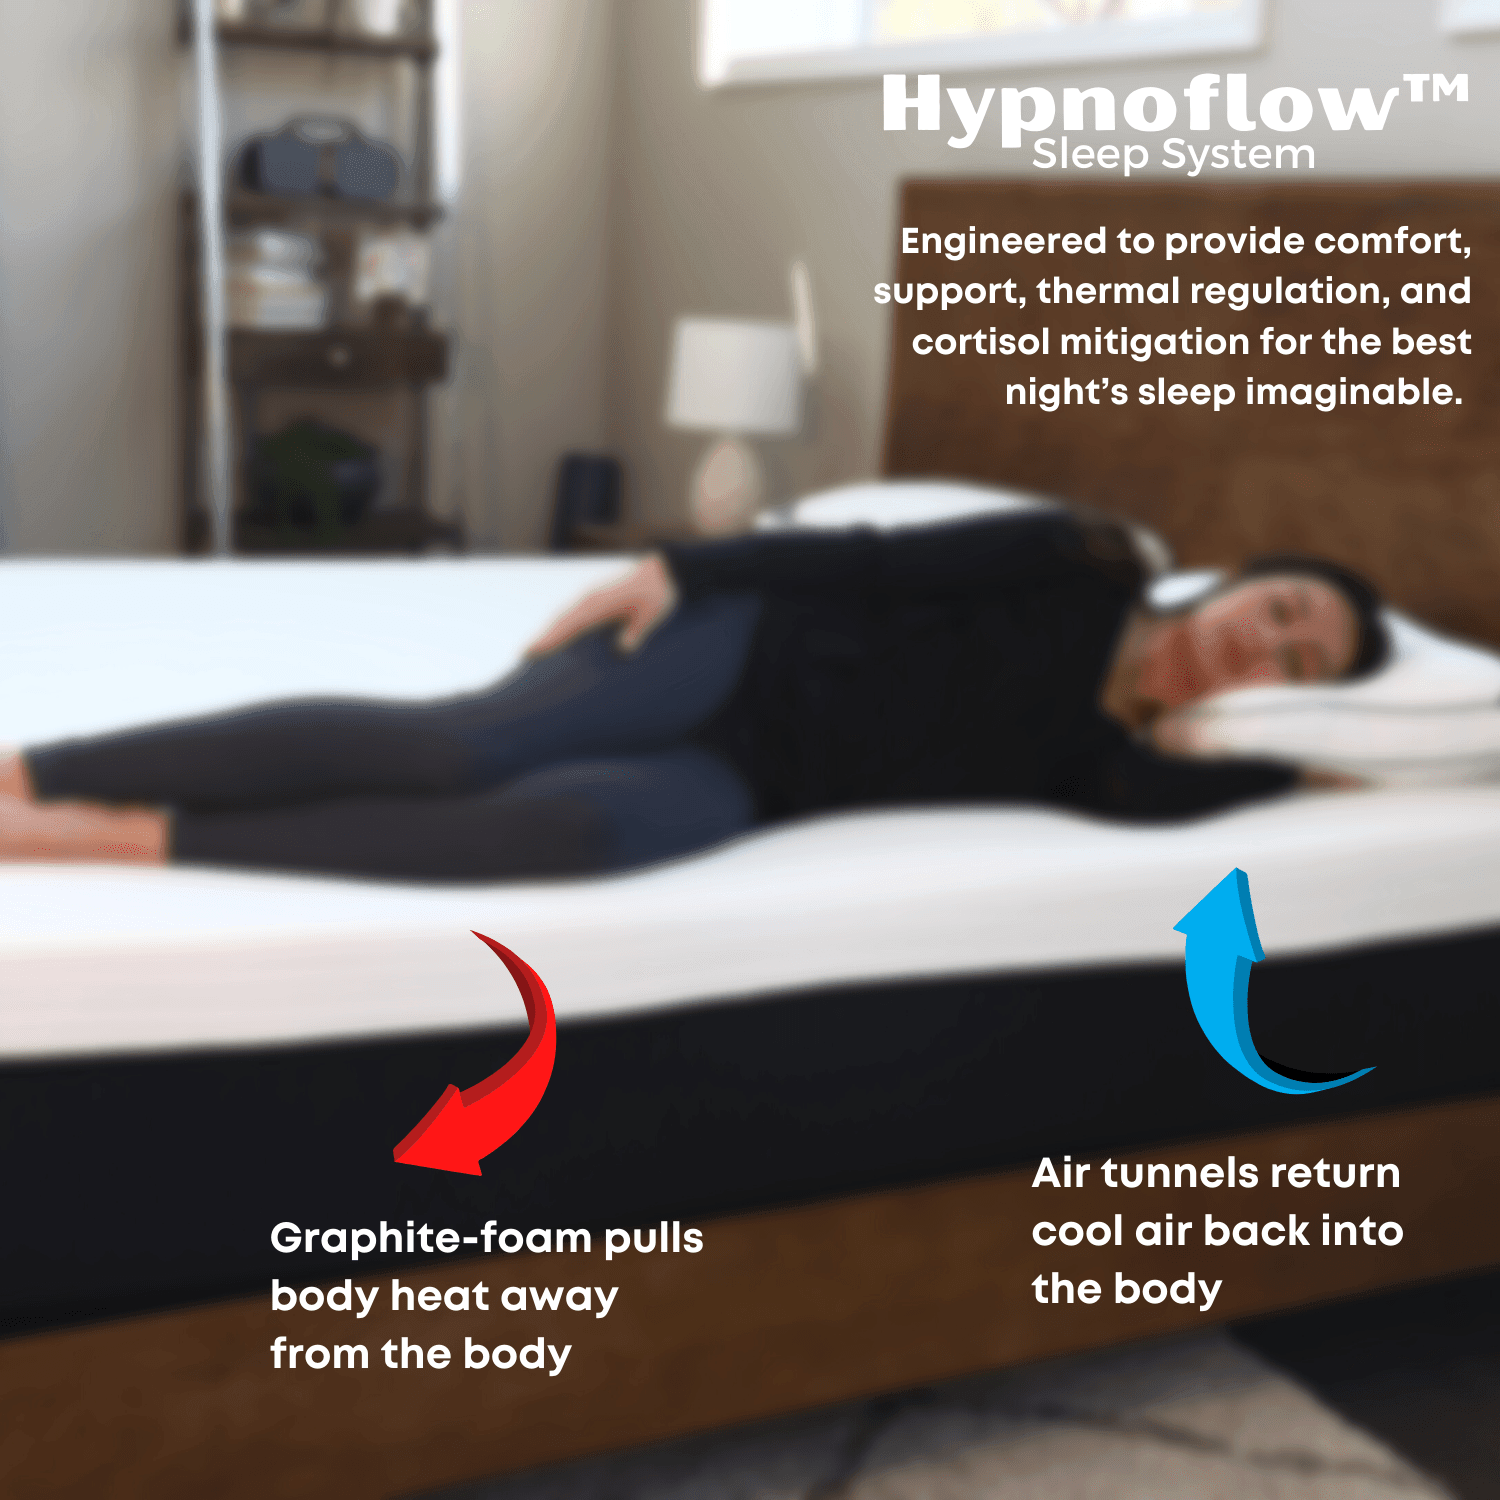 TKO™ Mattress with Hypnoflow™ Sleep Technology by Pillow-Fight – home of the Good Pillow!